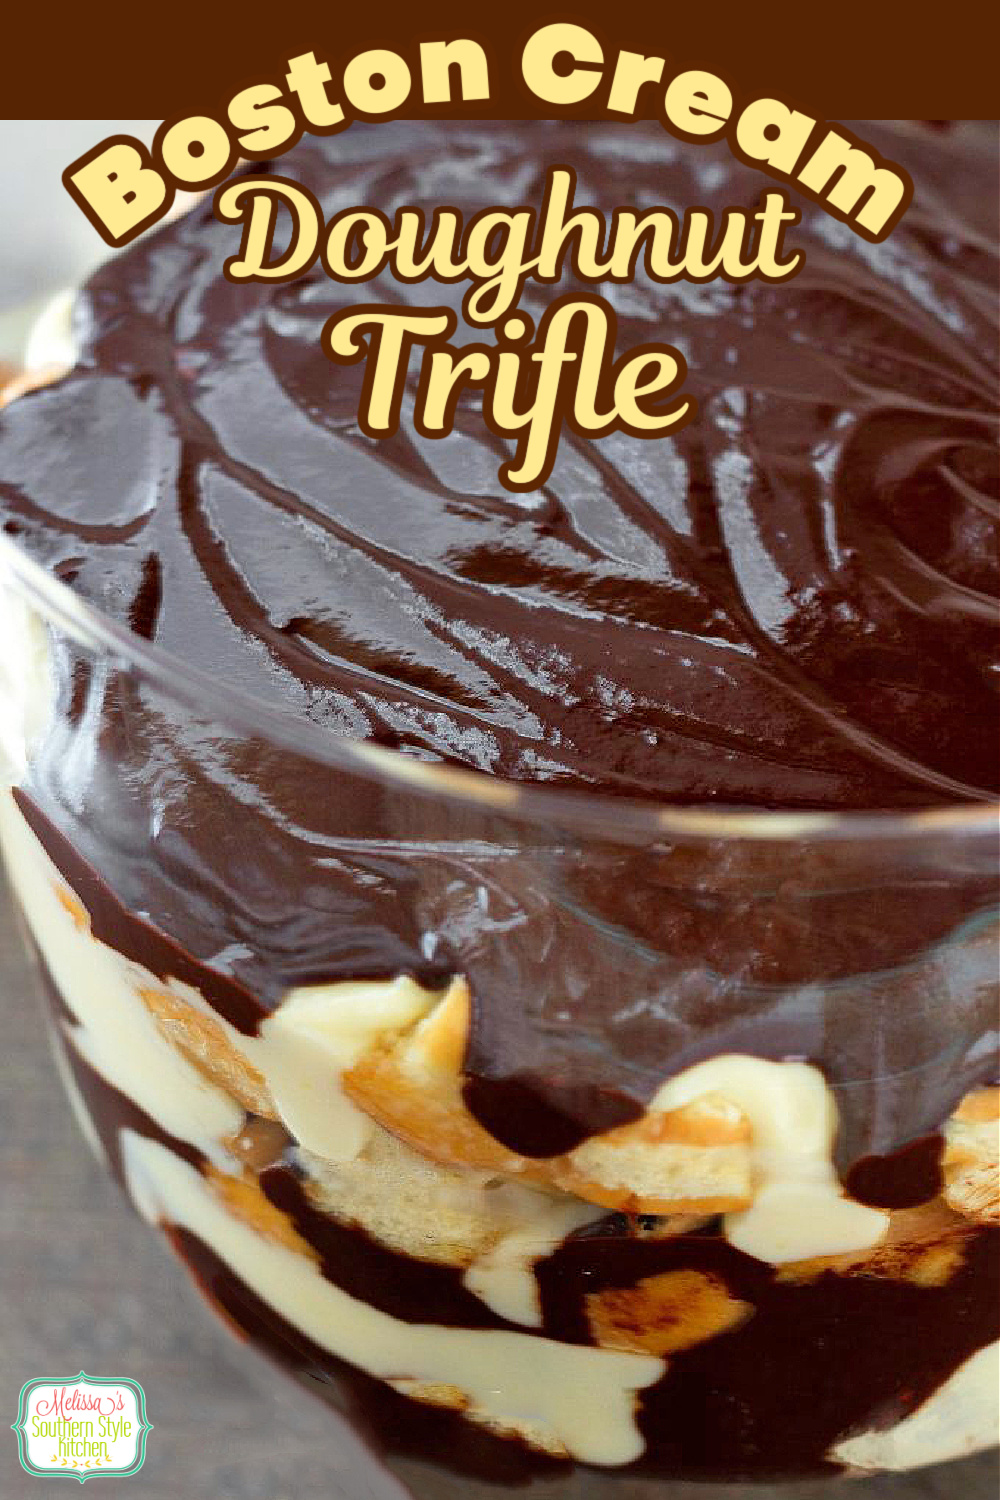 This Boston Cream Doughnut Trifle features layers of pastry cream, doughnuts and and gooey chocolate #bostoncream #bostoncreamdoughnuts #bostoncreamtrifle #trifles #triflerecipes #desserts #dessertfoodrecipes #holidaydesserts #southernfood #donuts #doughnuts #southernrecipes via @melissasssk